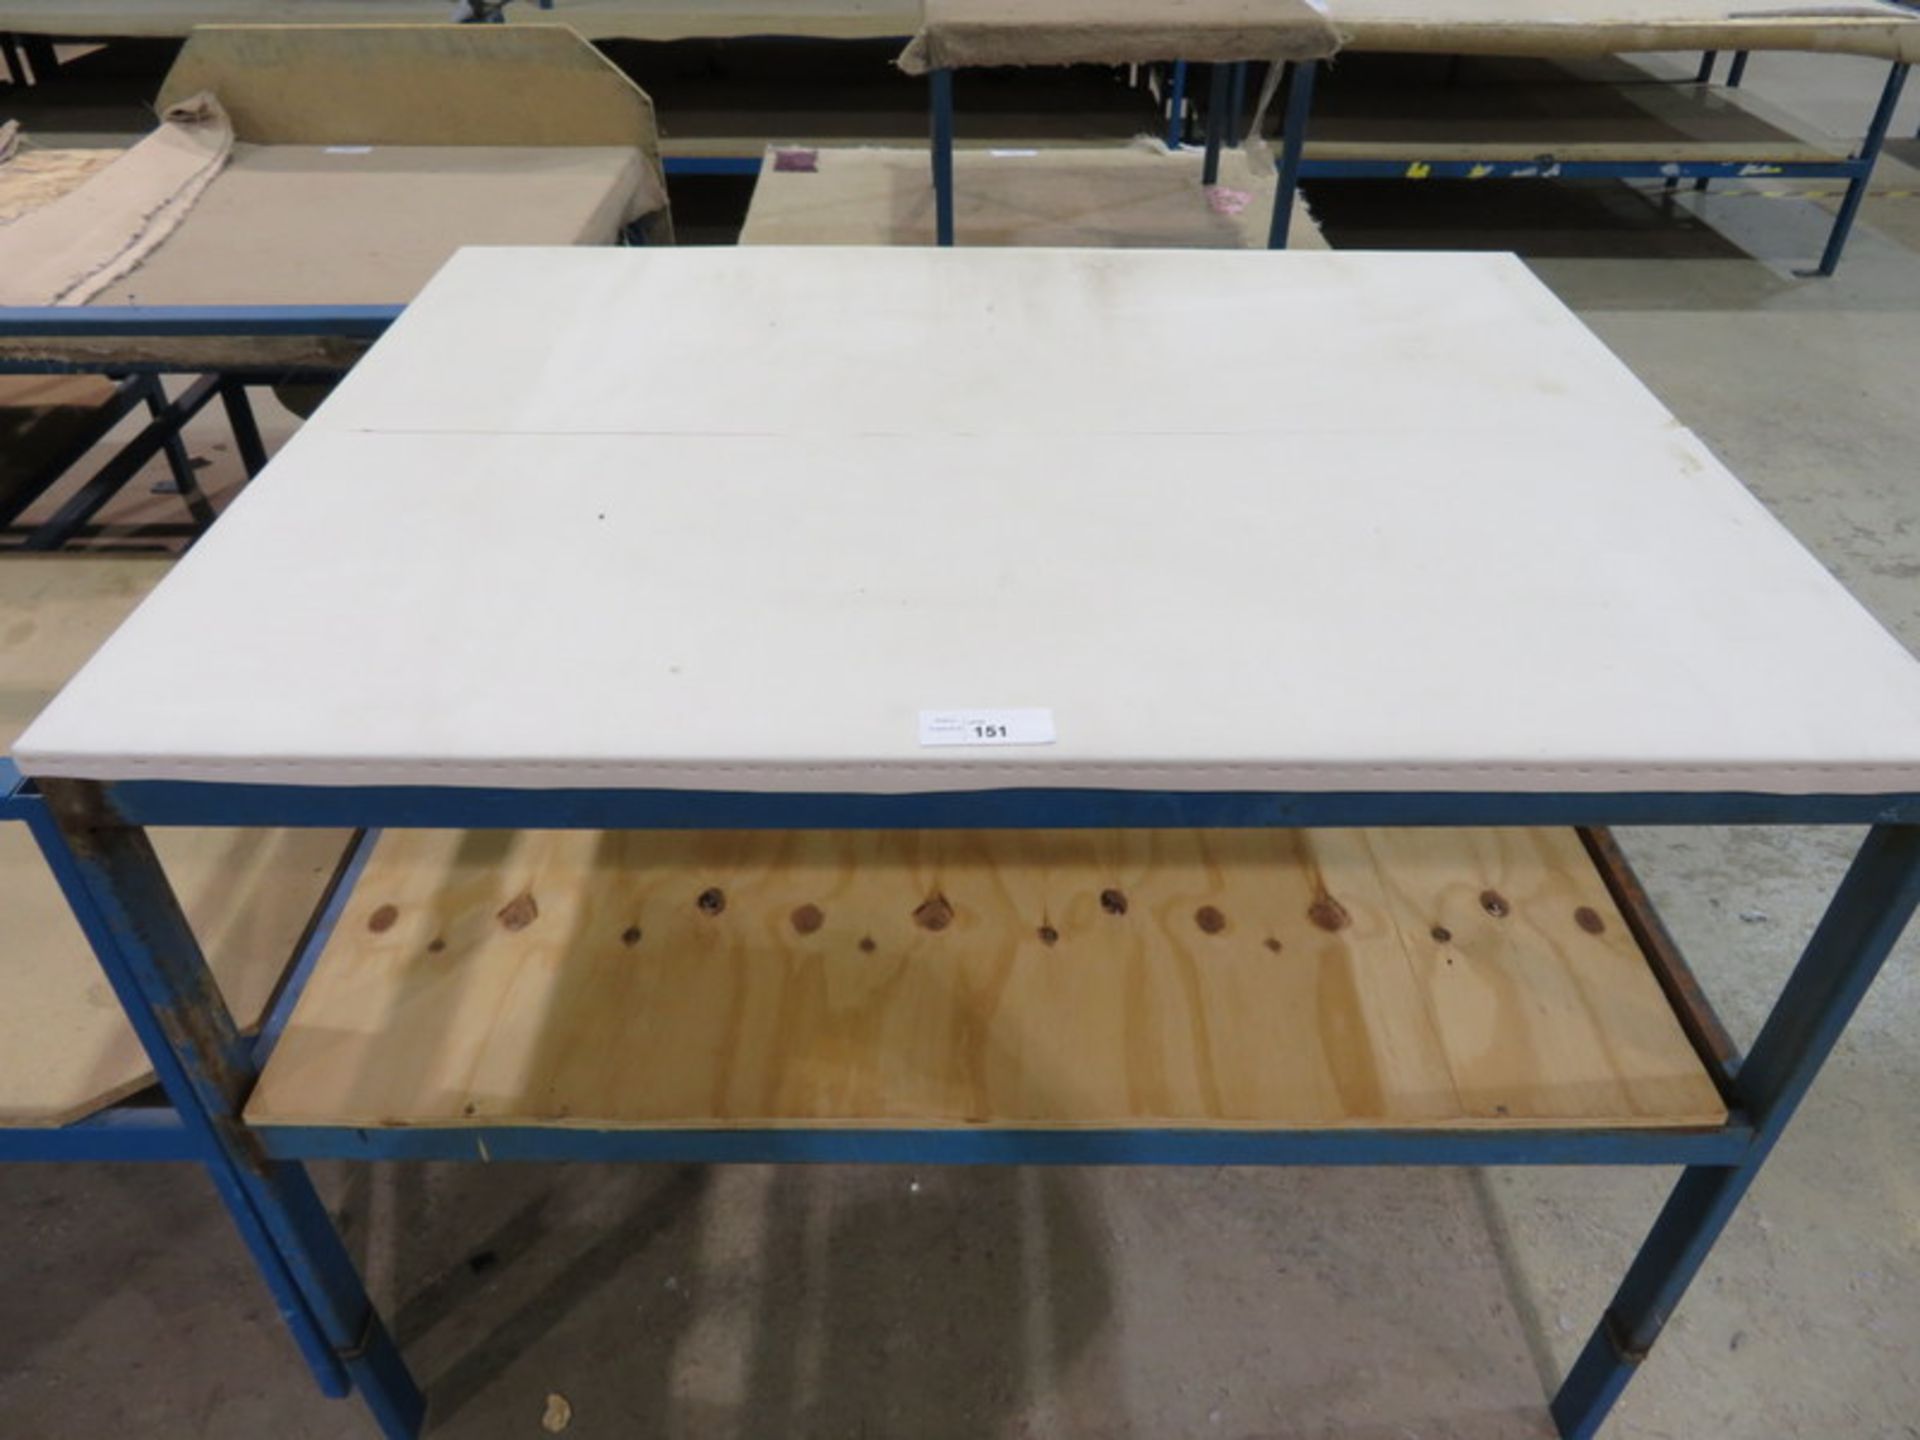 Metal frame wooden top cutting work bench - 1300 x 1000 x 970mm (LxDxH) - Image 2 of 2